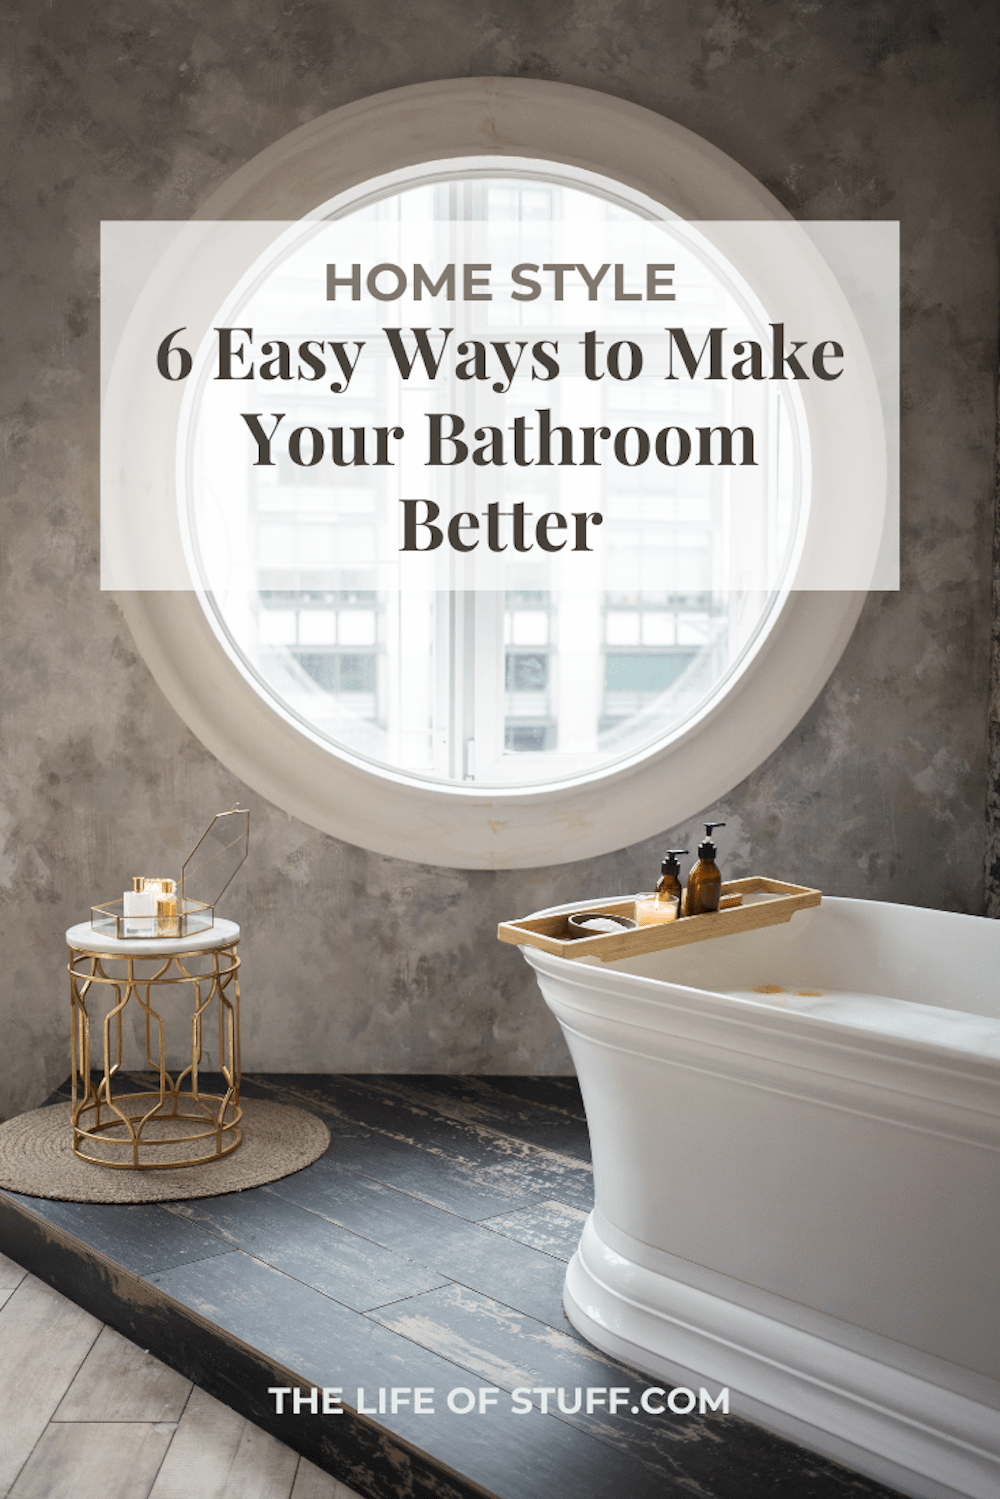 6 Easy Ways to Make Your Bathroom Better - The Life of Stuff